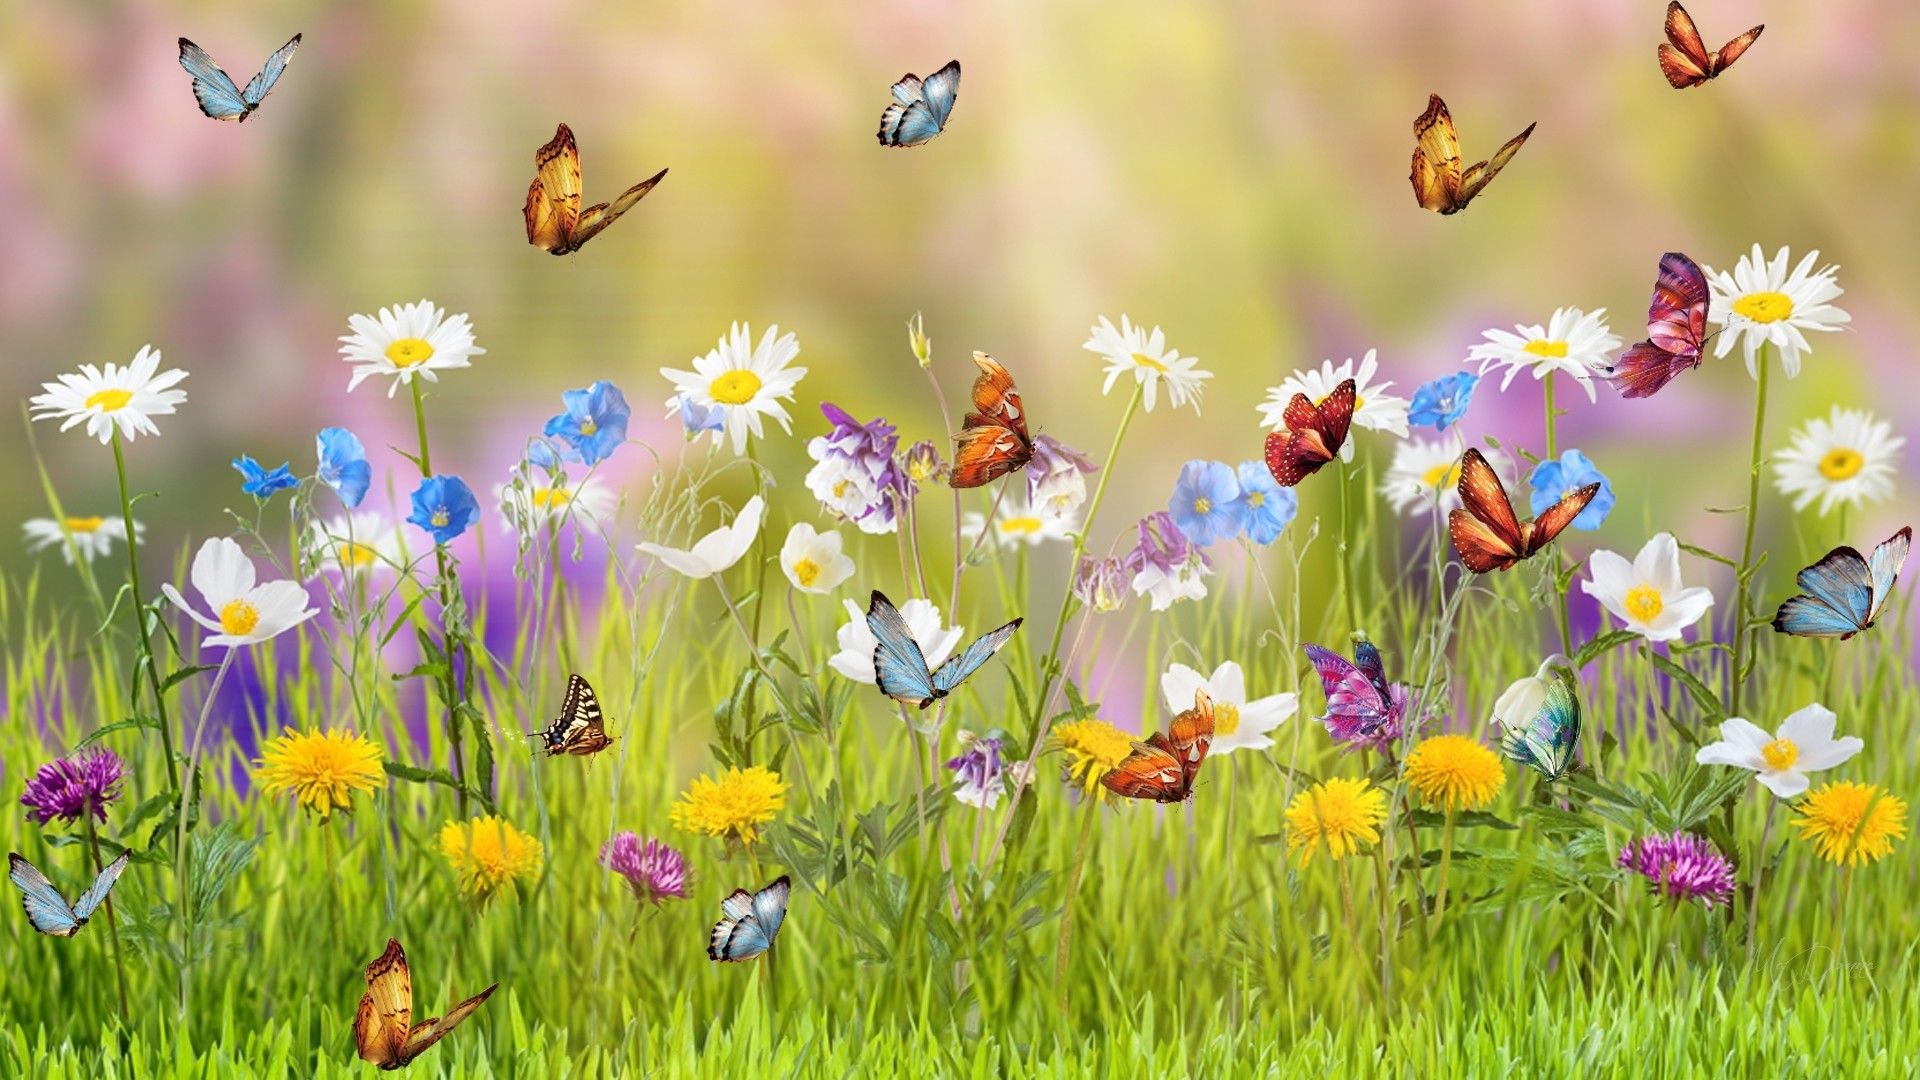 Spring Meadow Wallpaper background picture